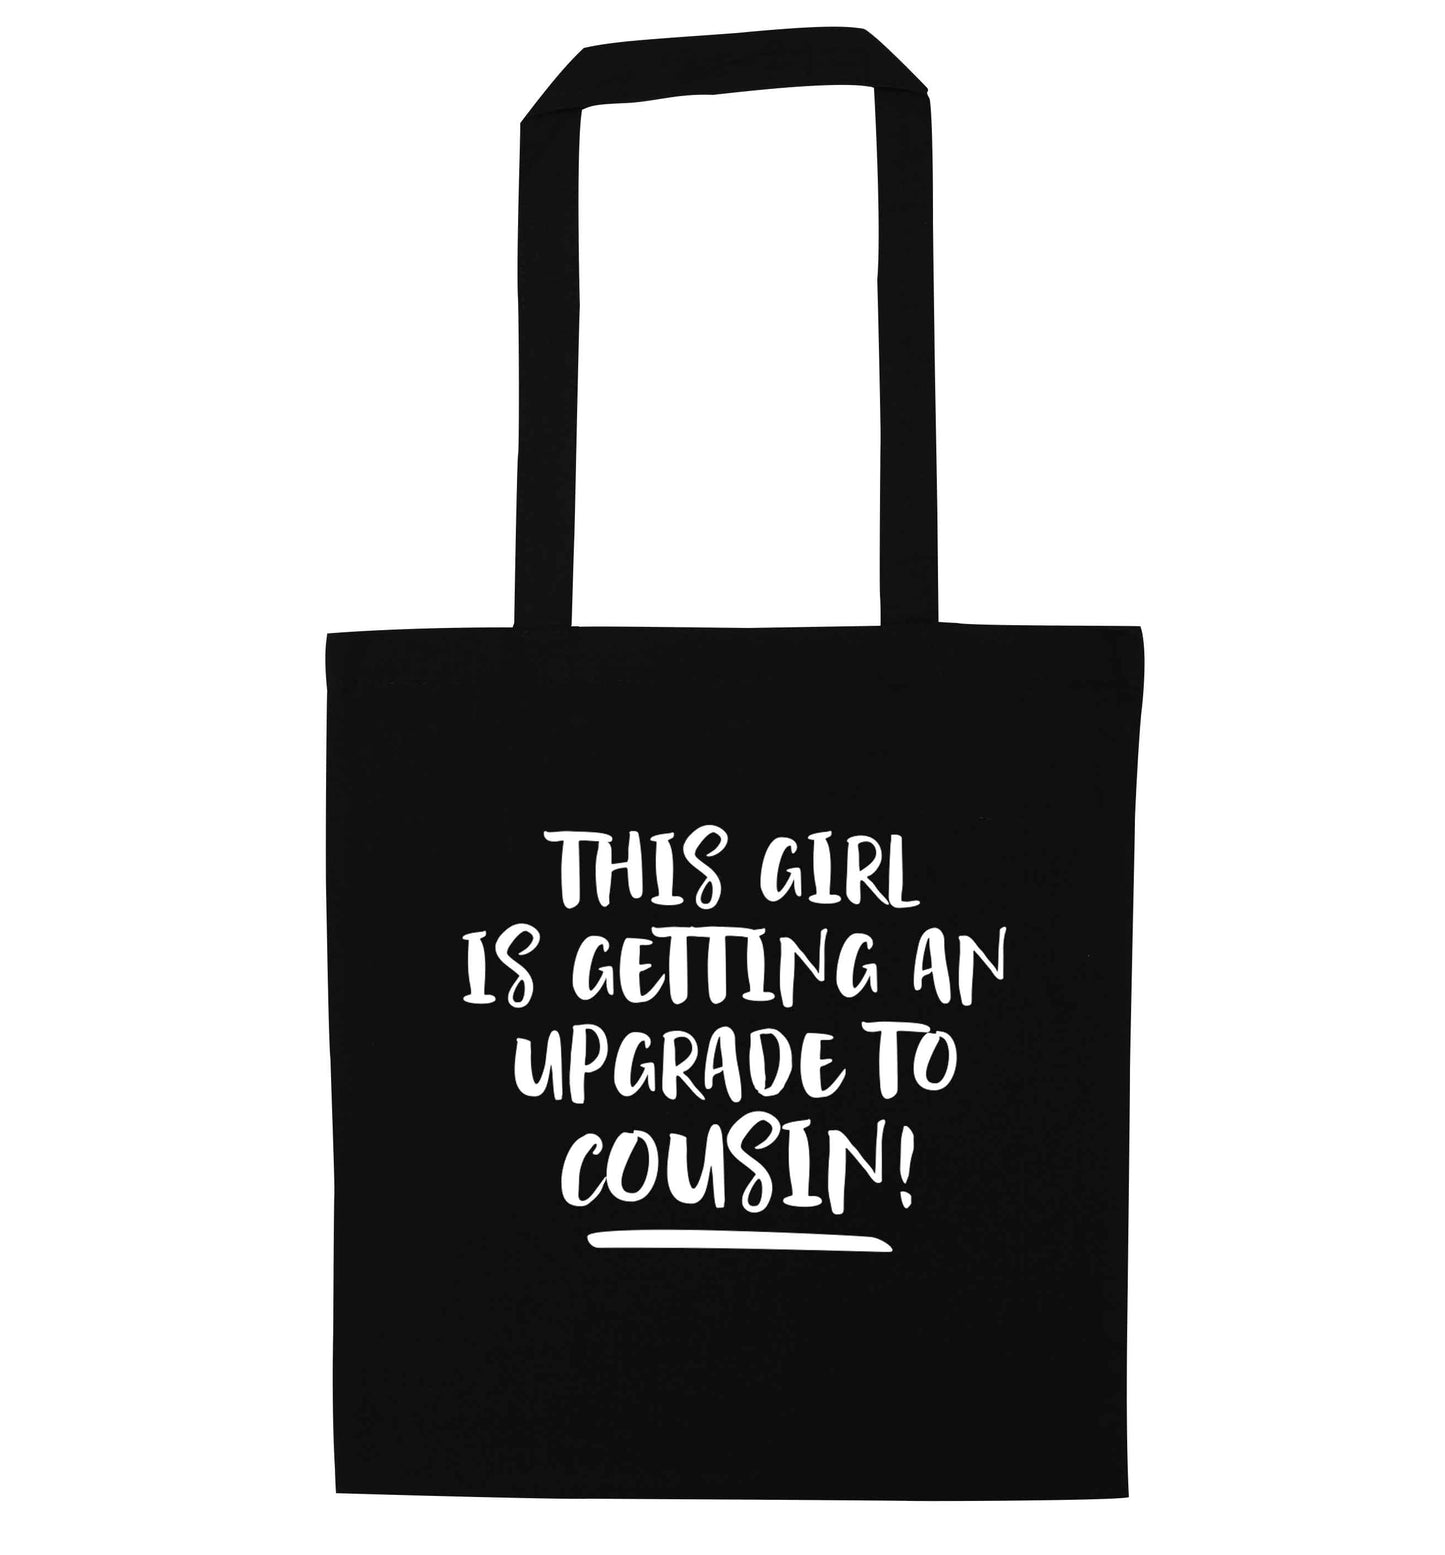 This girl is getting an upgrade to cousin! black tote bag